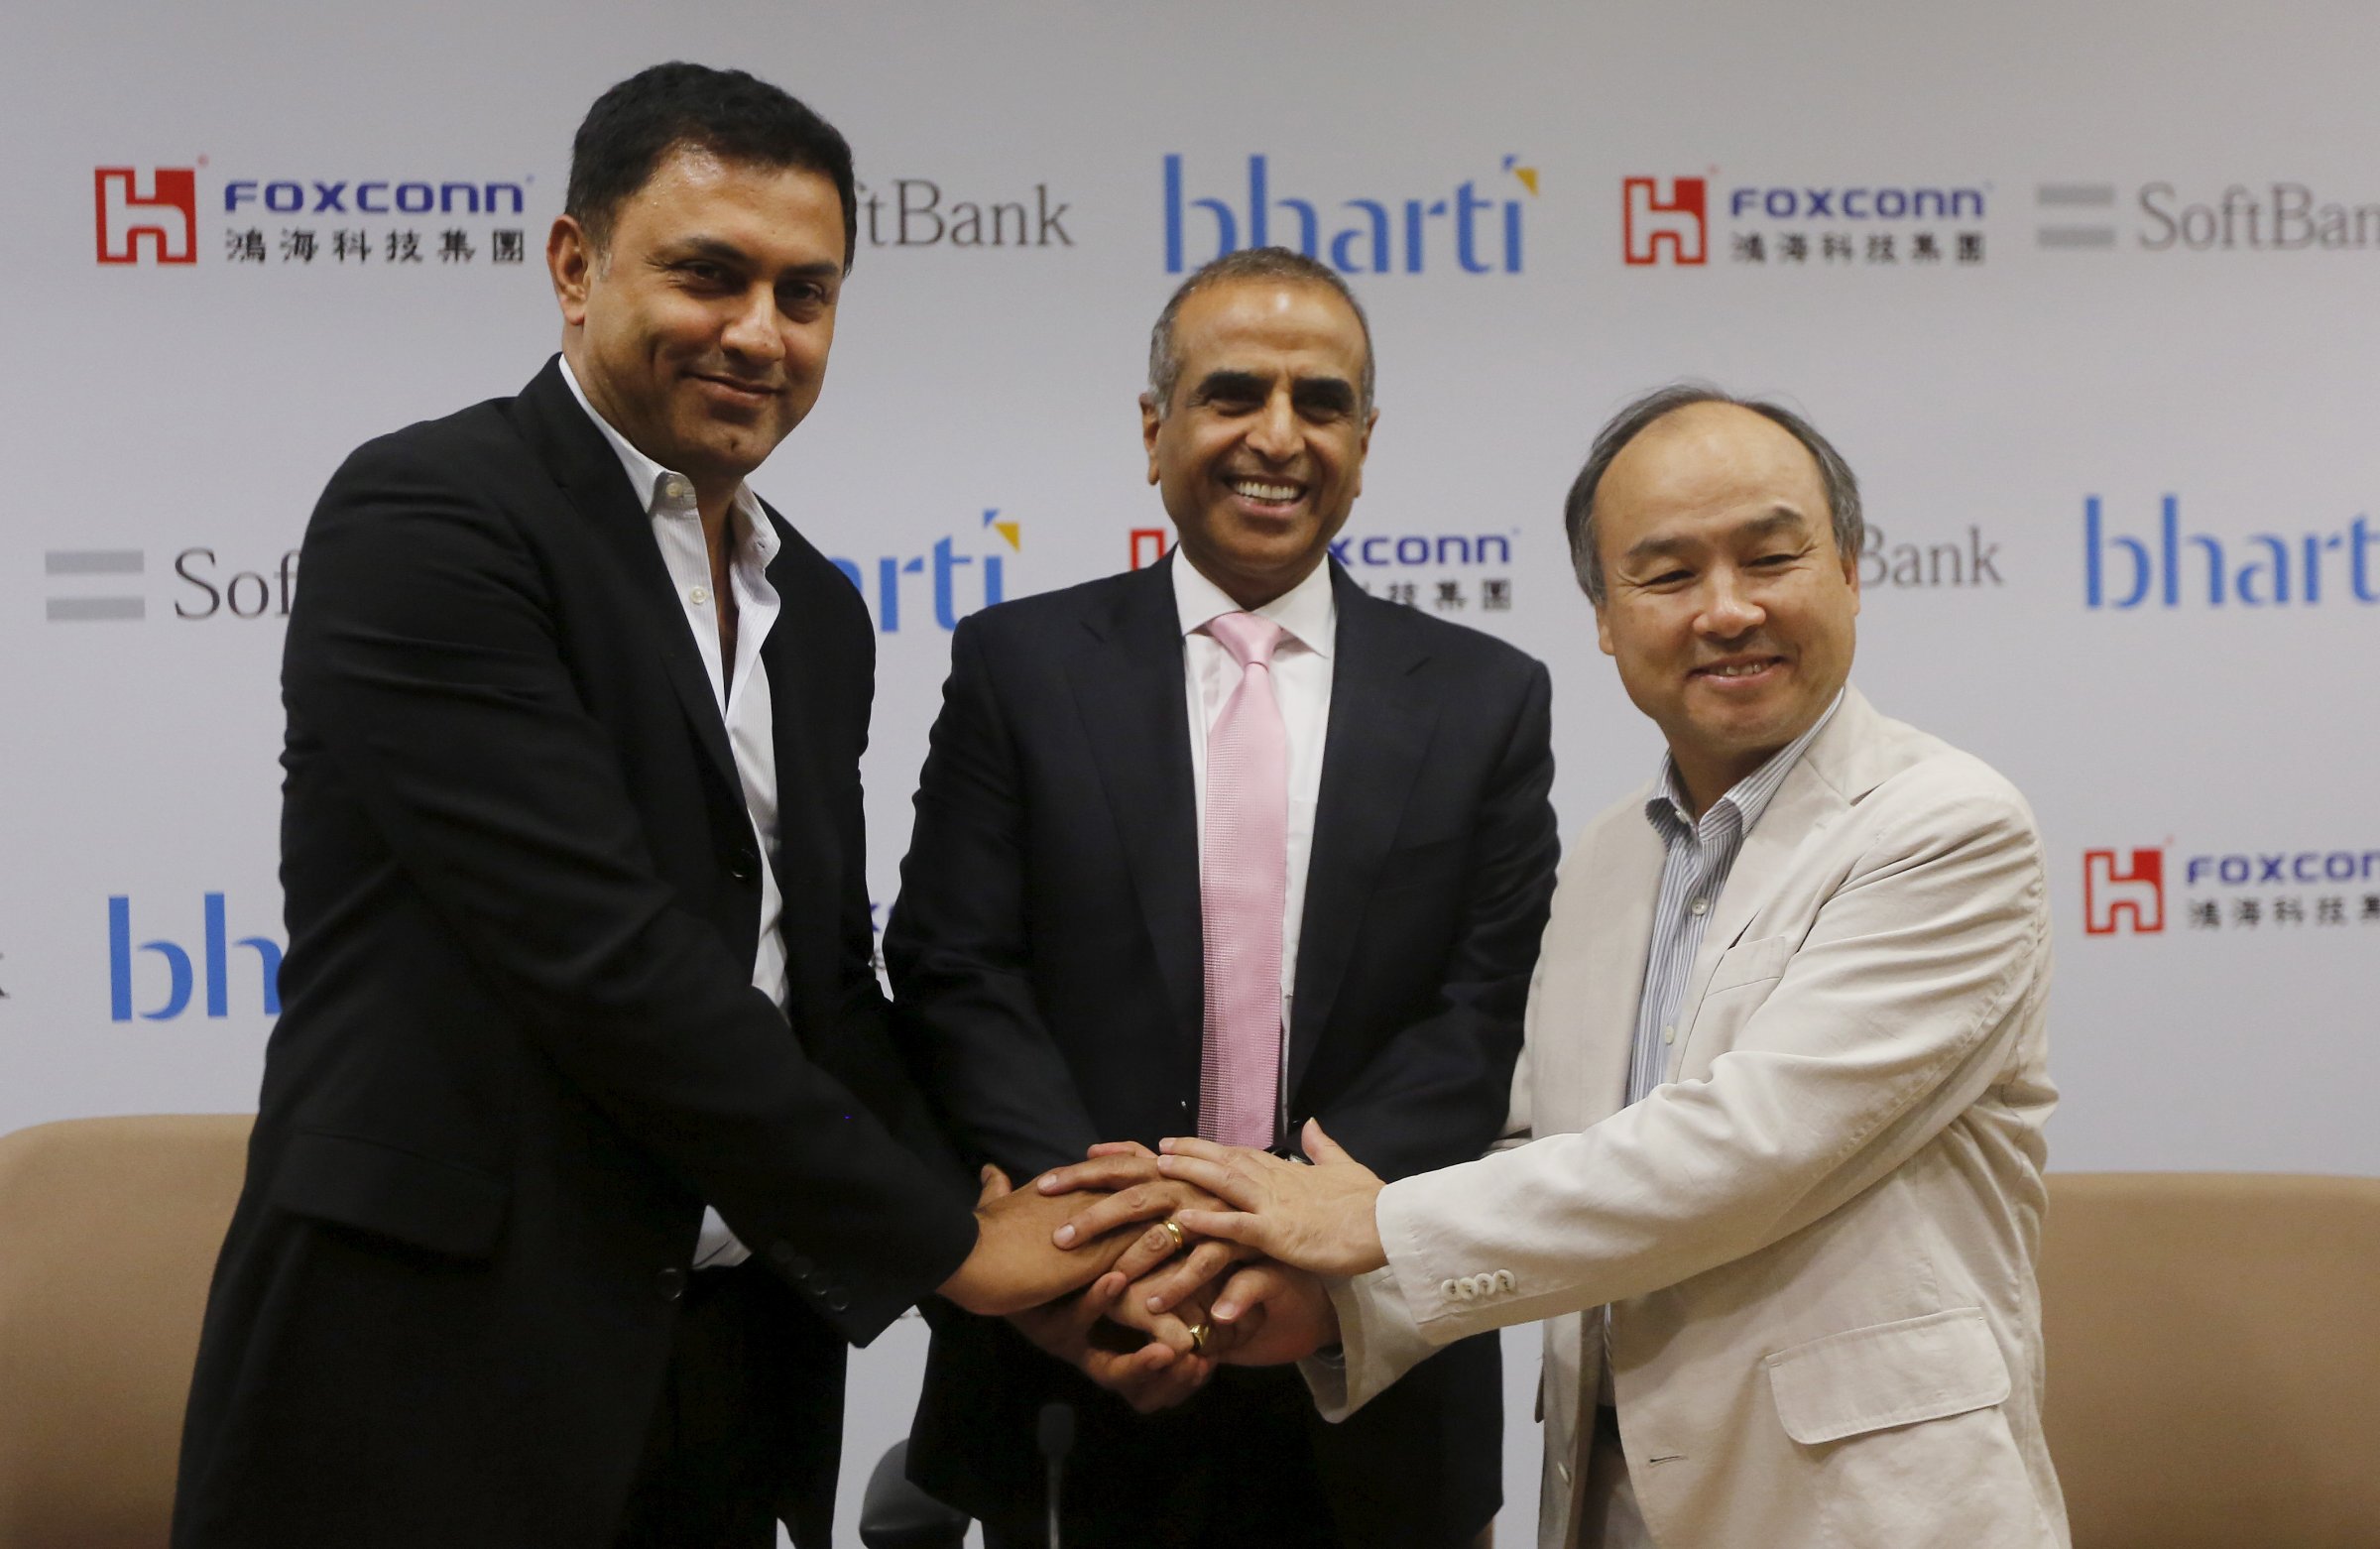 Son, founder and chief executive officer of Japan's SoftBank Corp., Arora, president of SoftBank Corp. and Mittal, chairman of Bharti Enterprises, shake hands before the start of a news conference in New Delhi